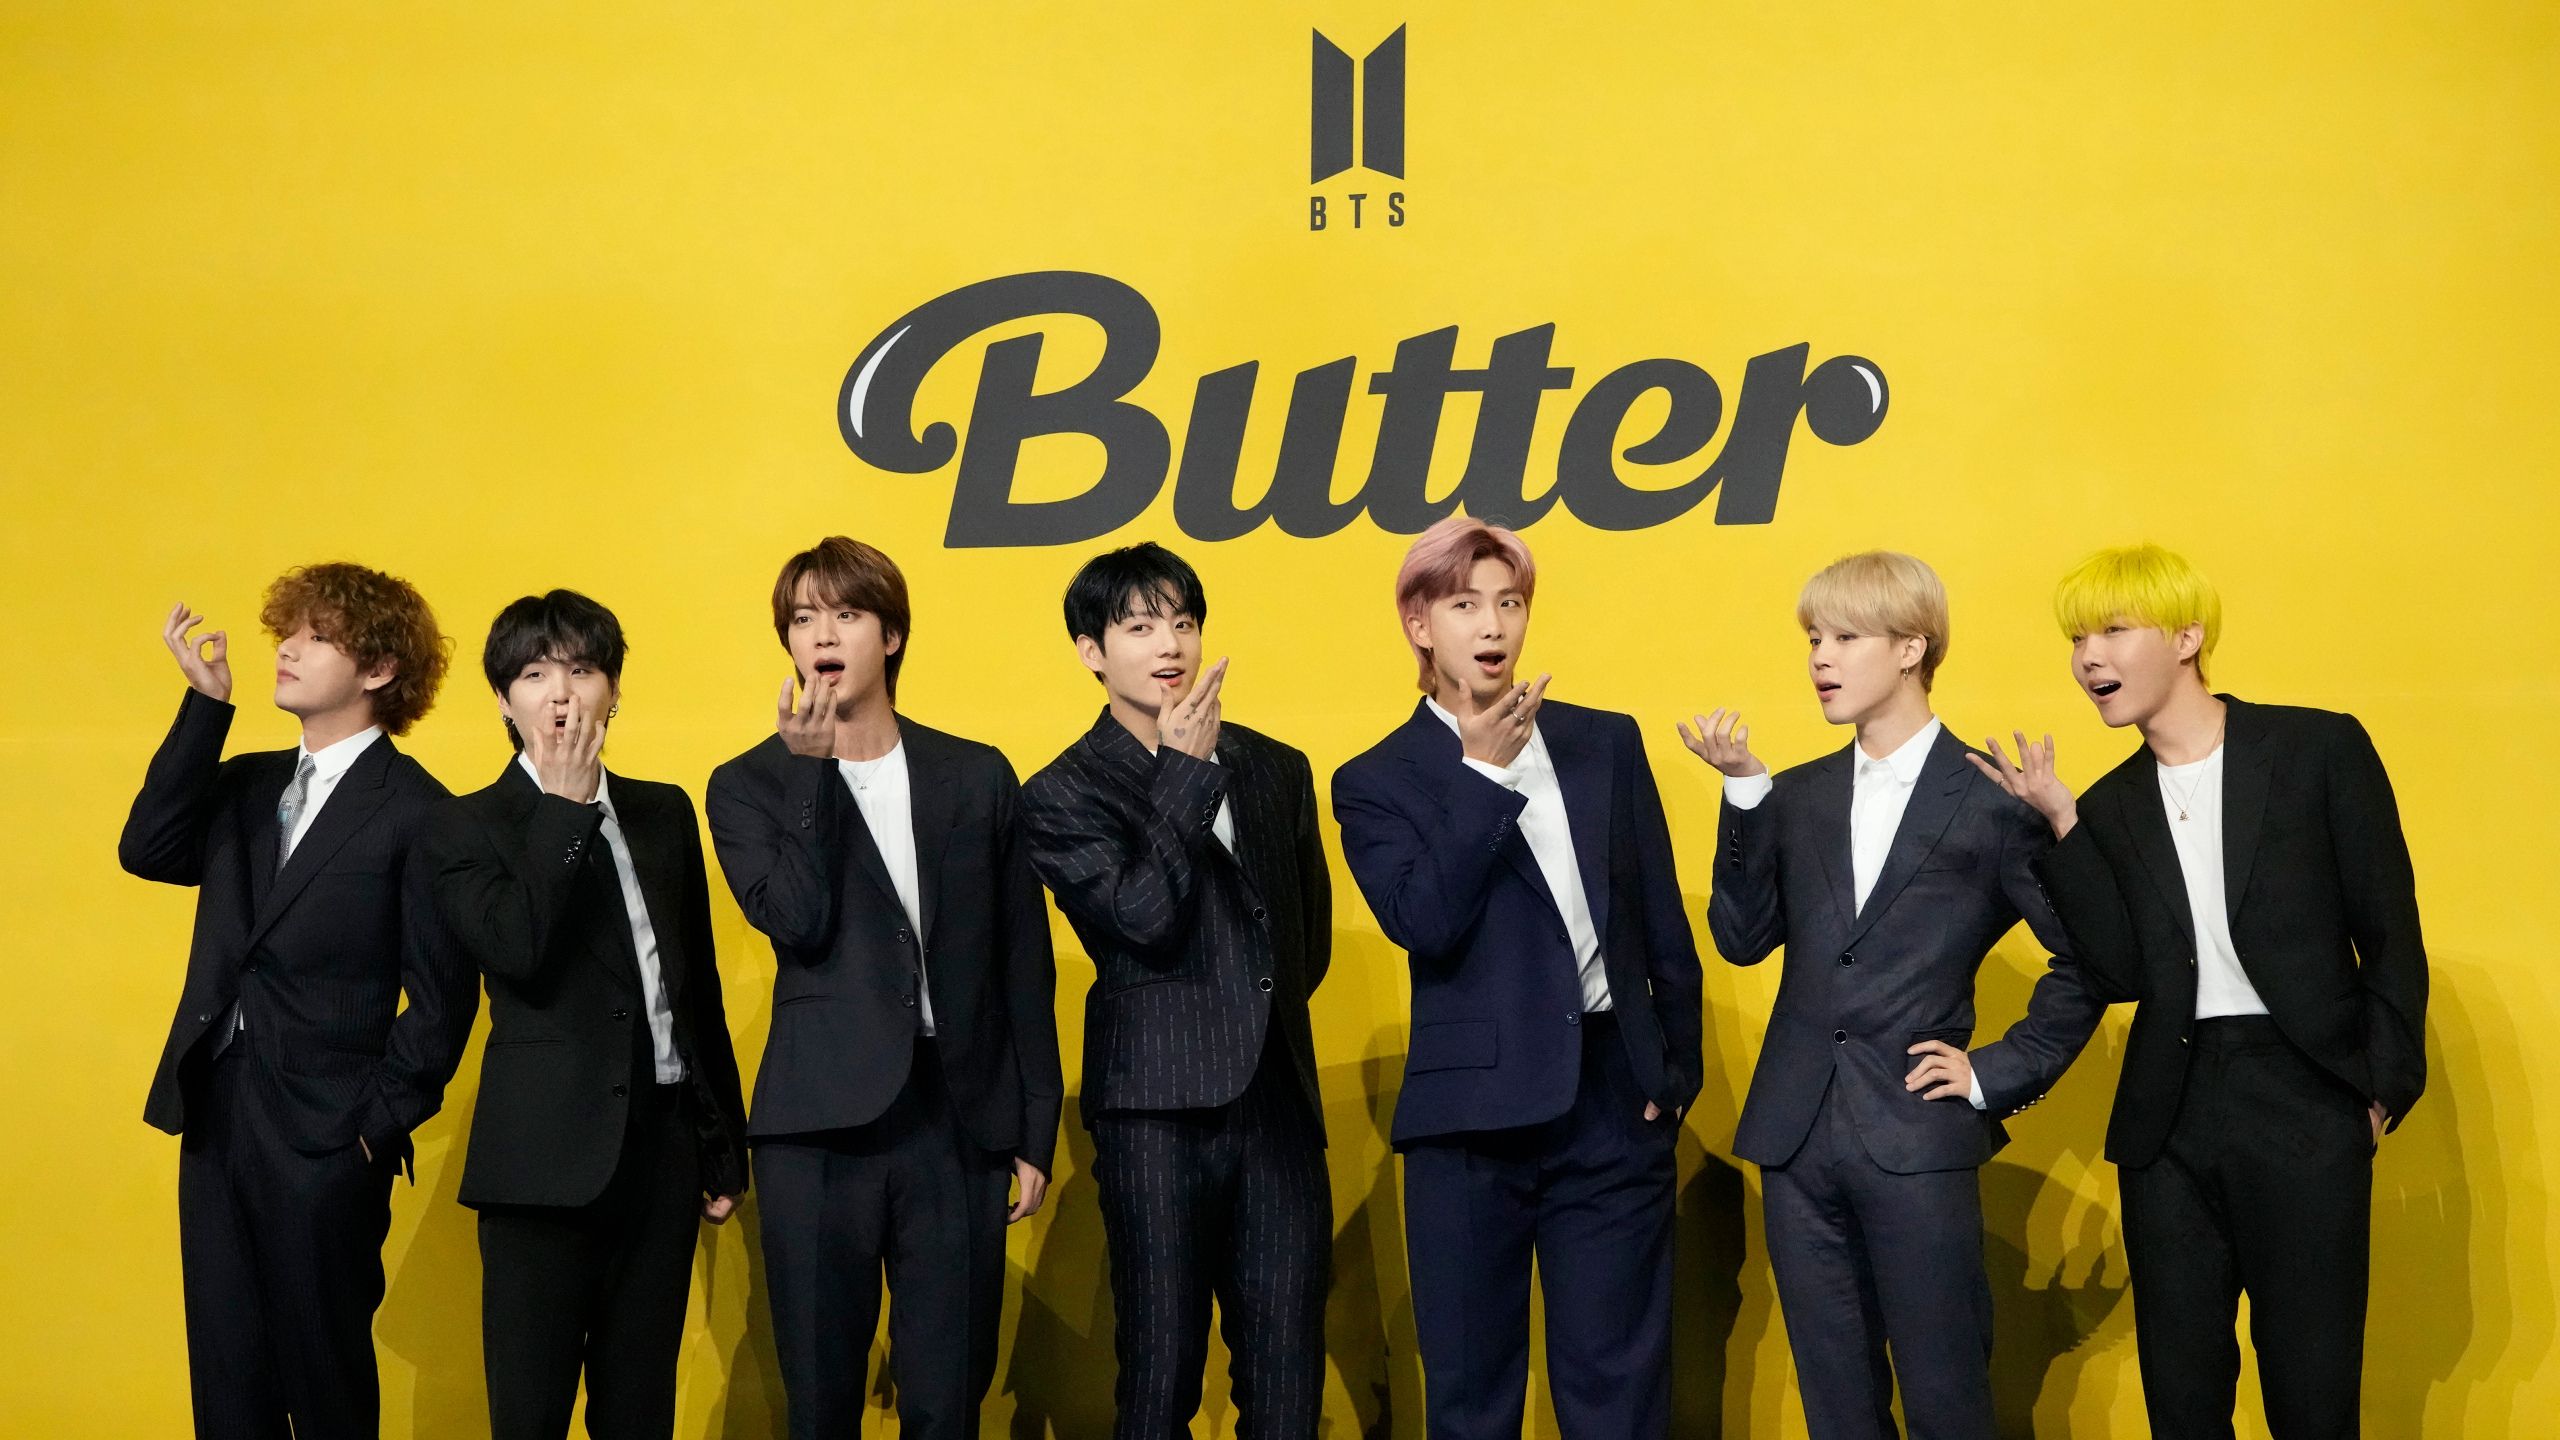 BTS Jin's Blue Hair Journey: From "Boy in Luv" to "Butter" - wide 3